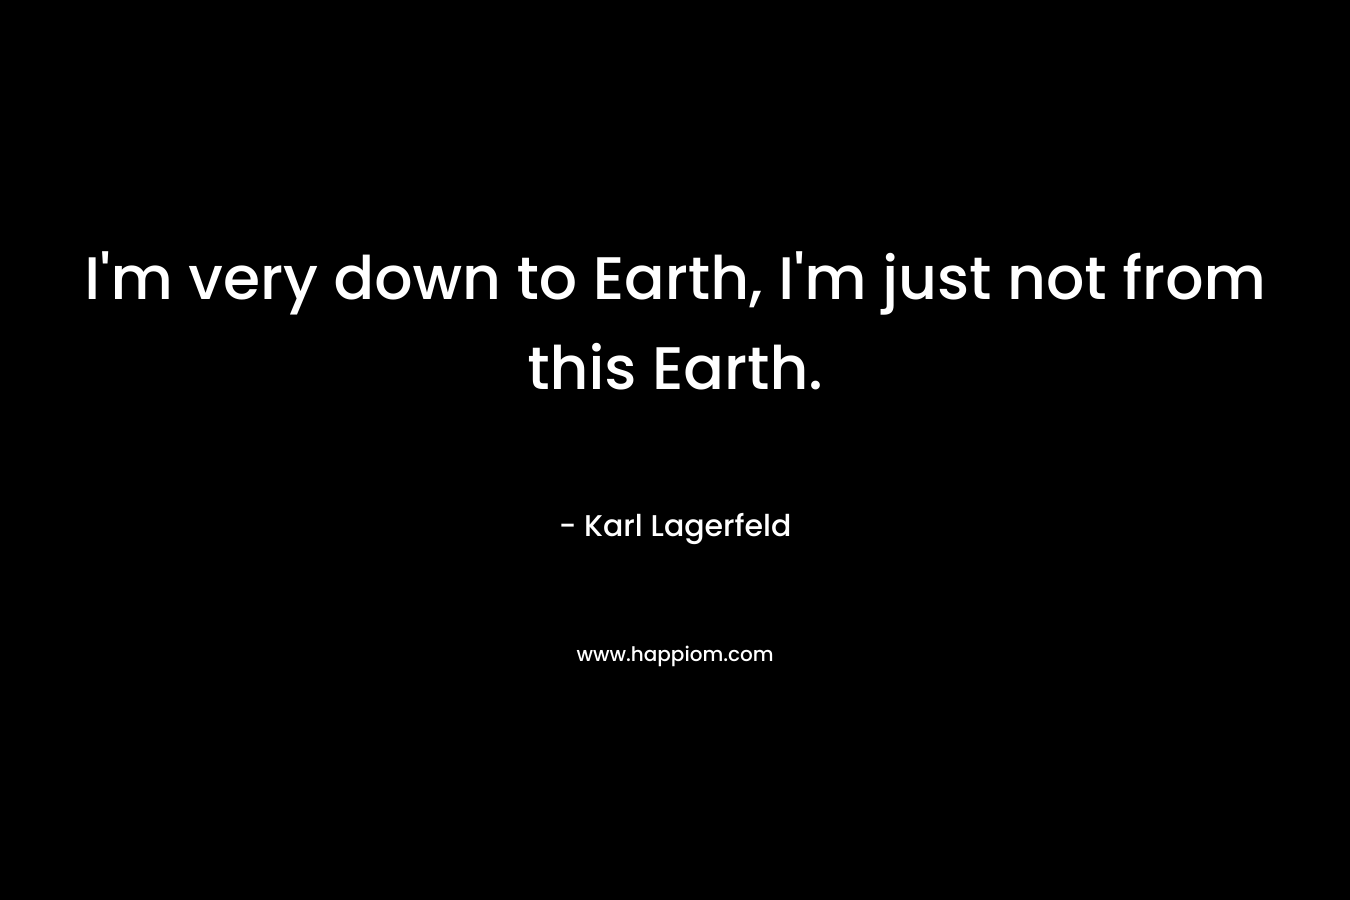 I'm very down to Earth, I'm just not from this Earth.